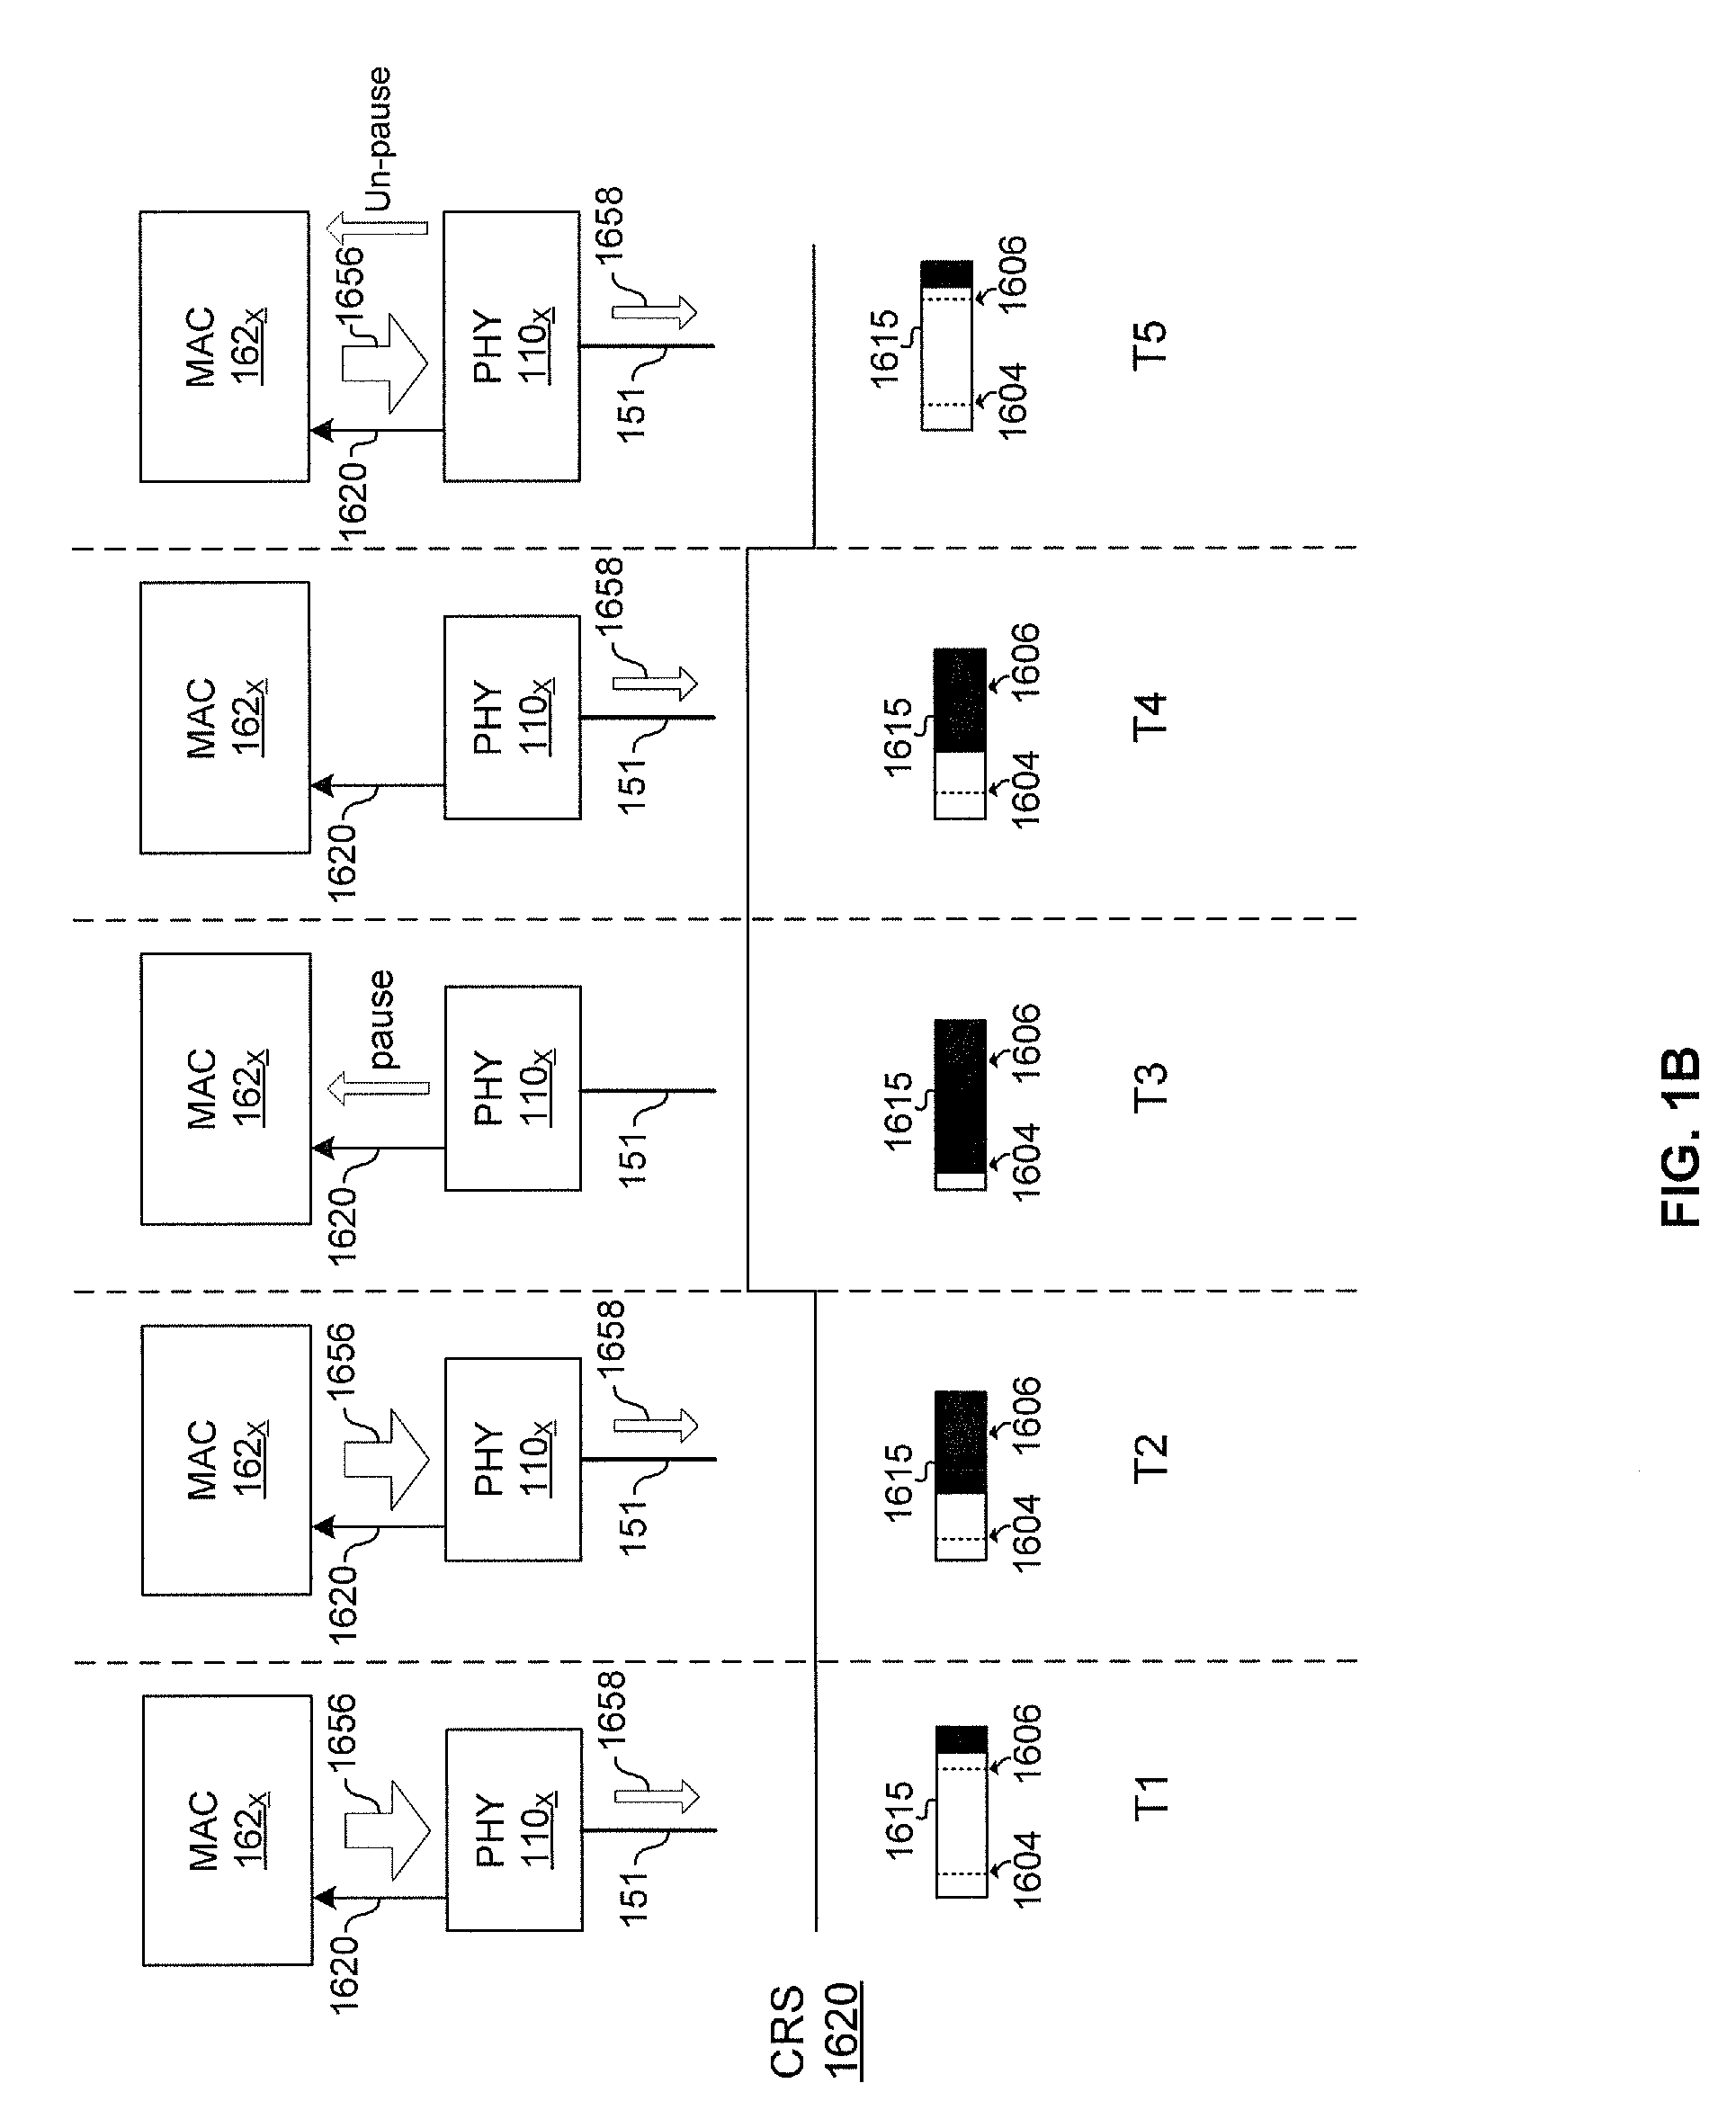 Method and system for link adaptive ethernet communications